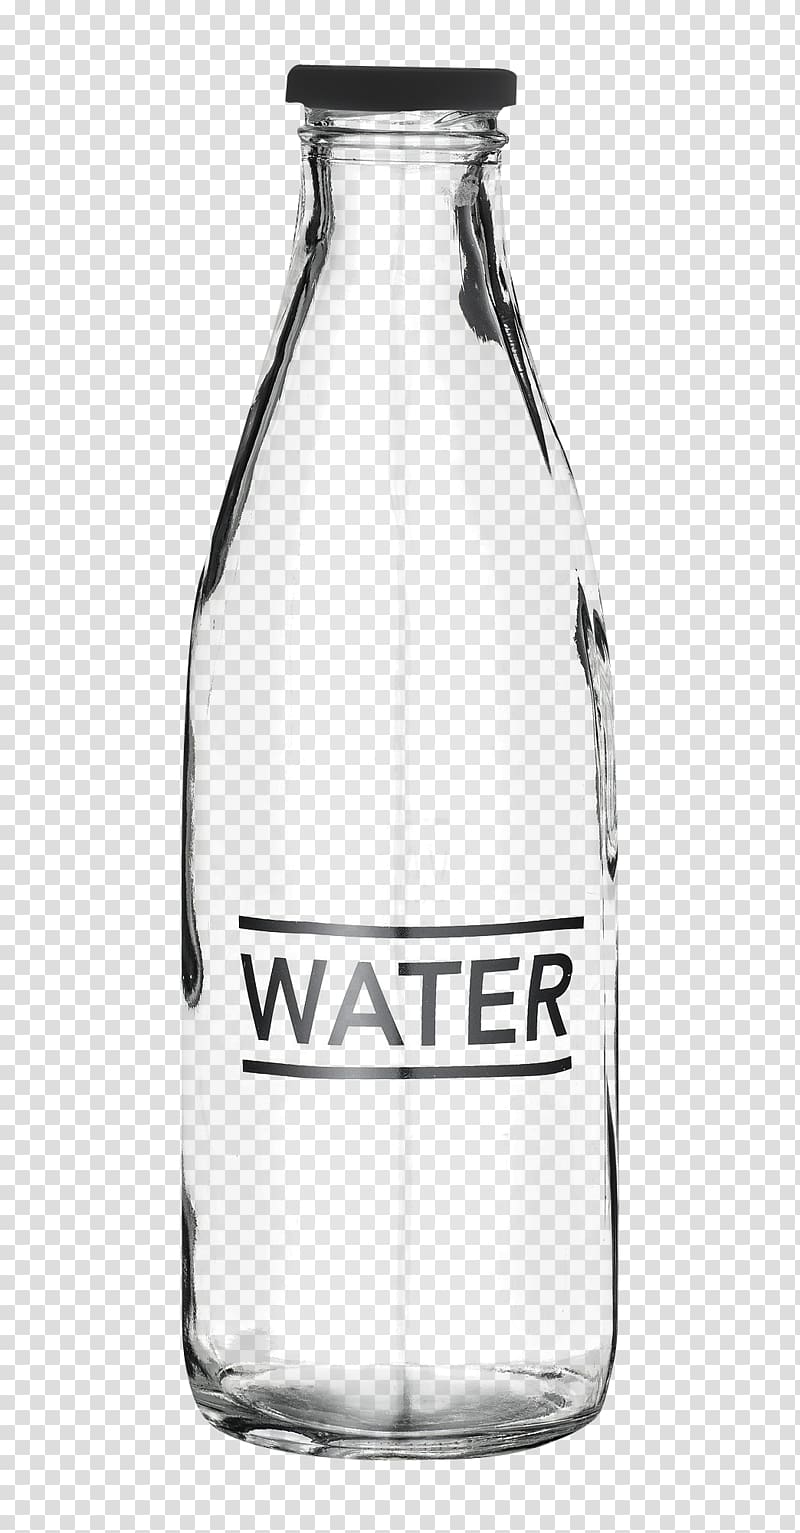 clear glass bottle water, Water bottle Glass Bottled water, Glass Water Bottle transparent background PNG clipart